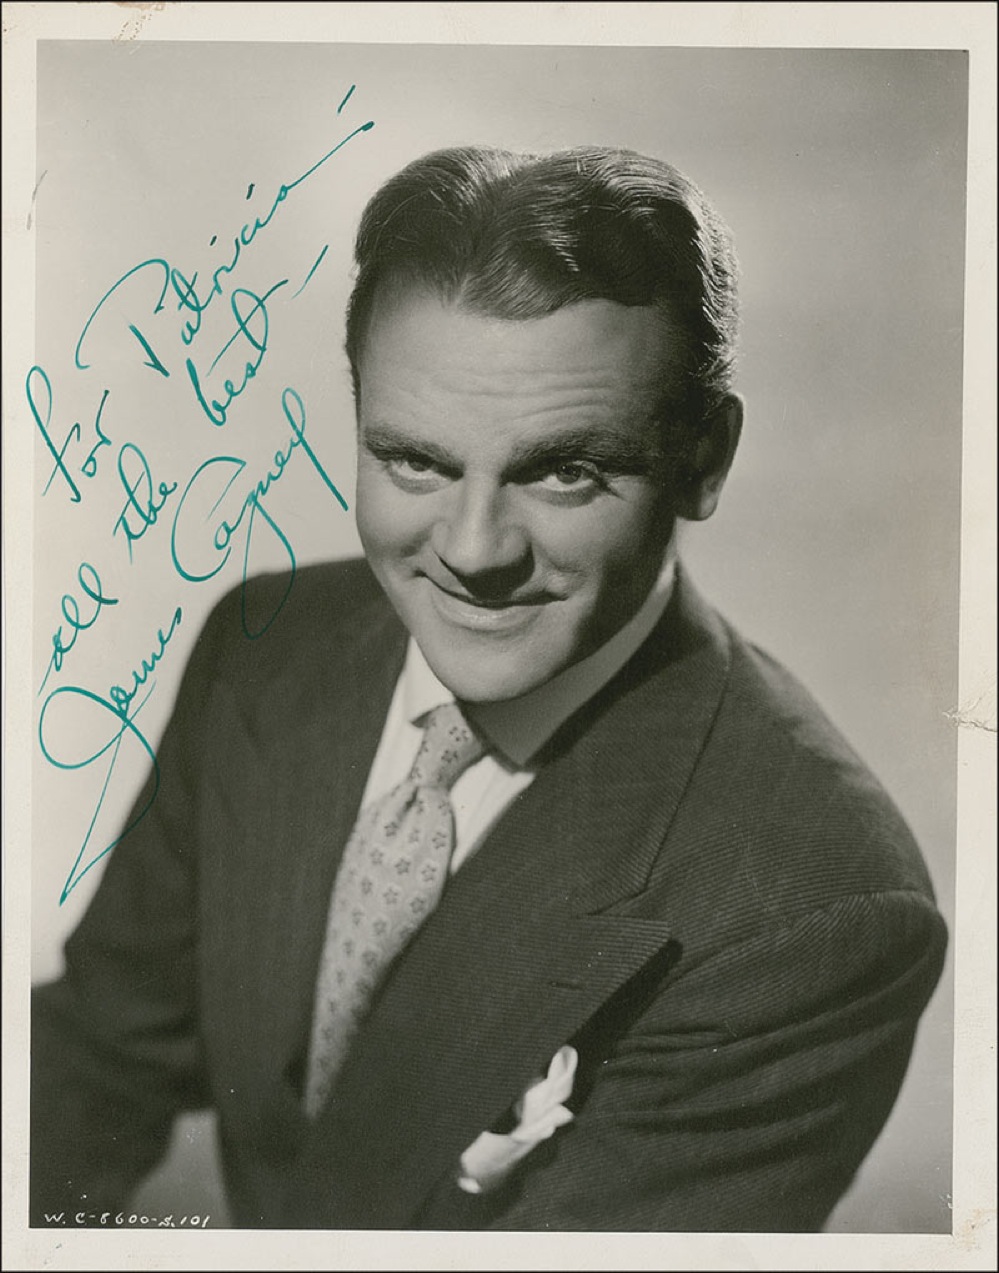 Lot #951 James Cagney